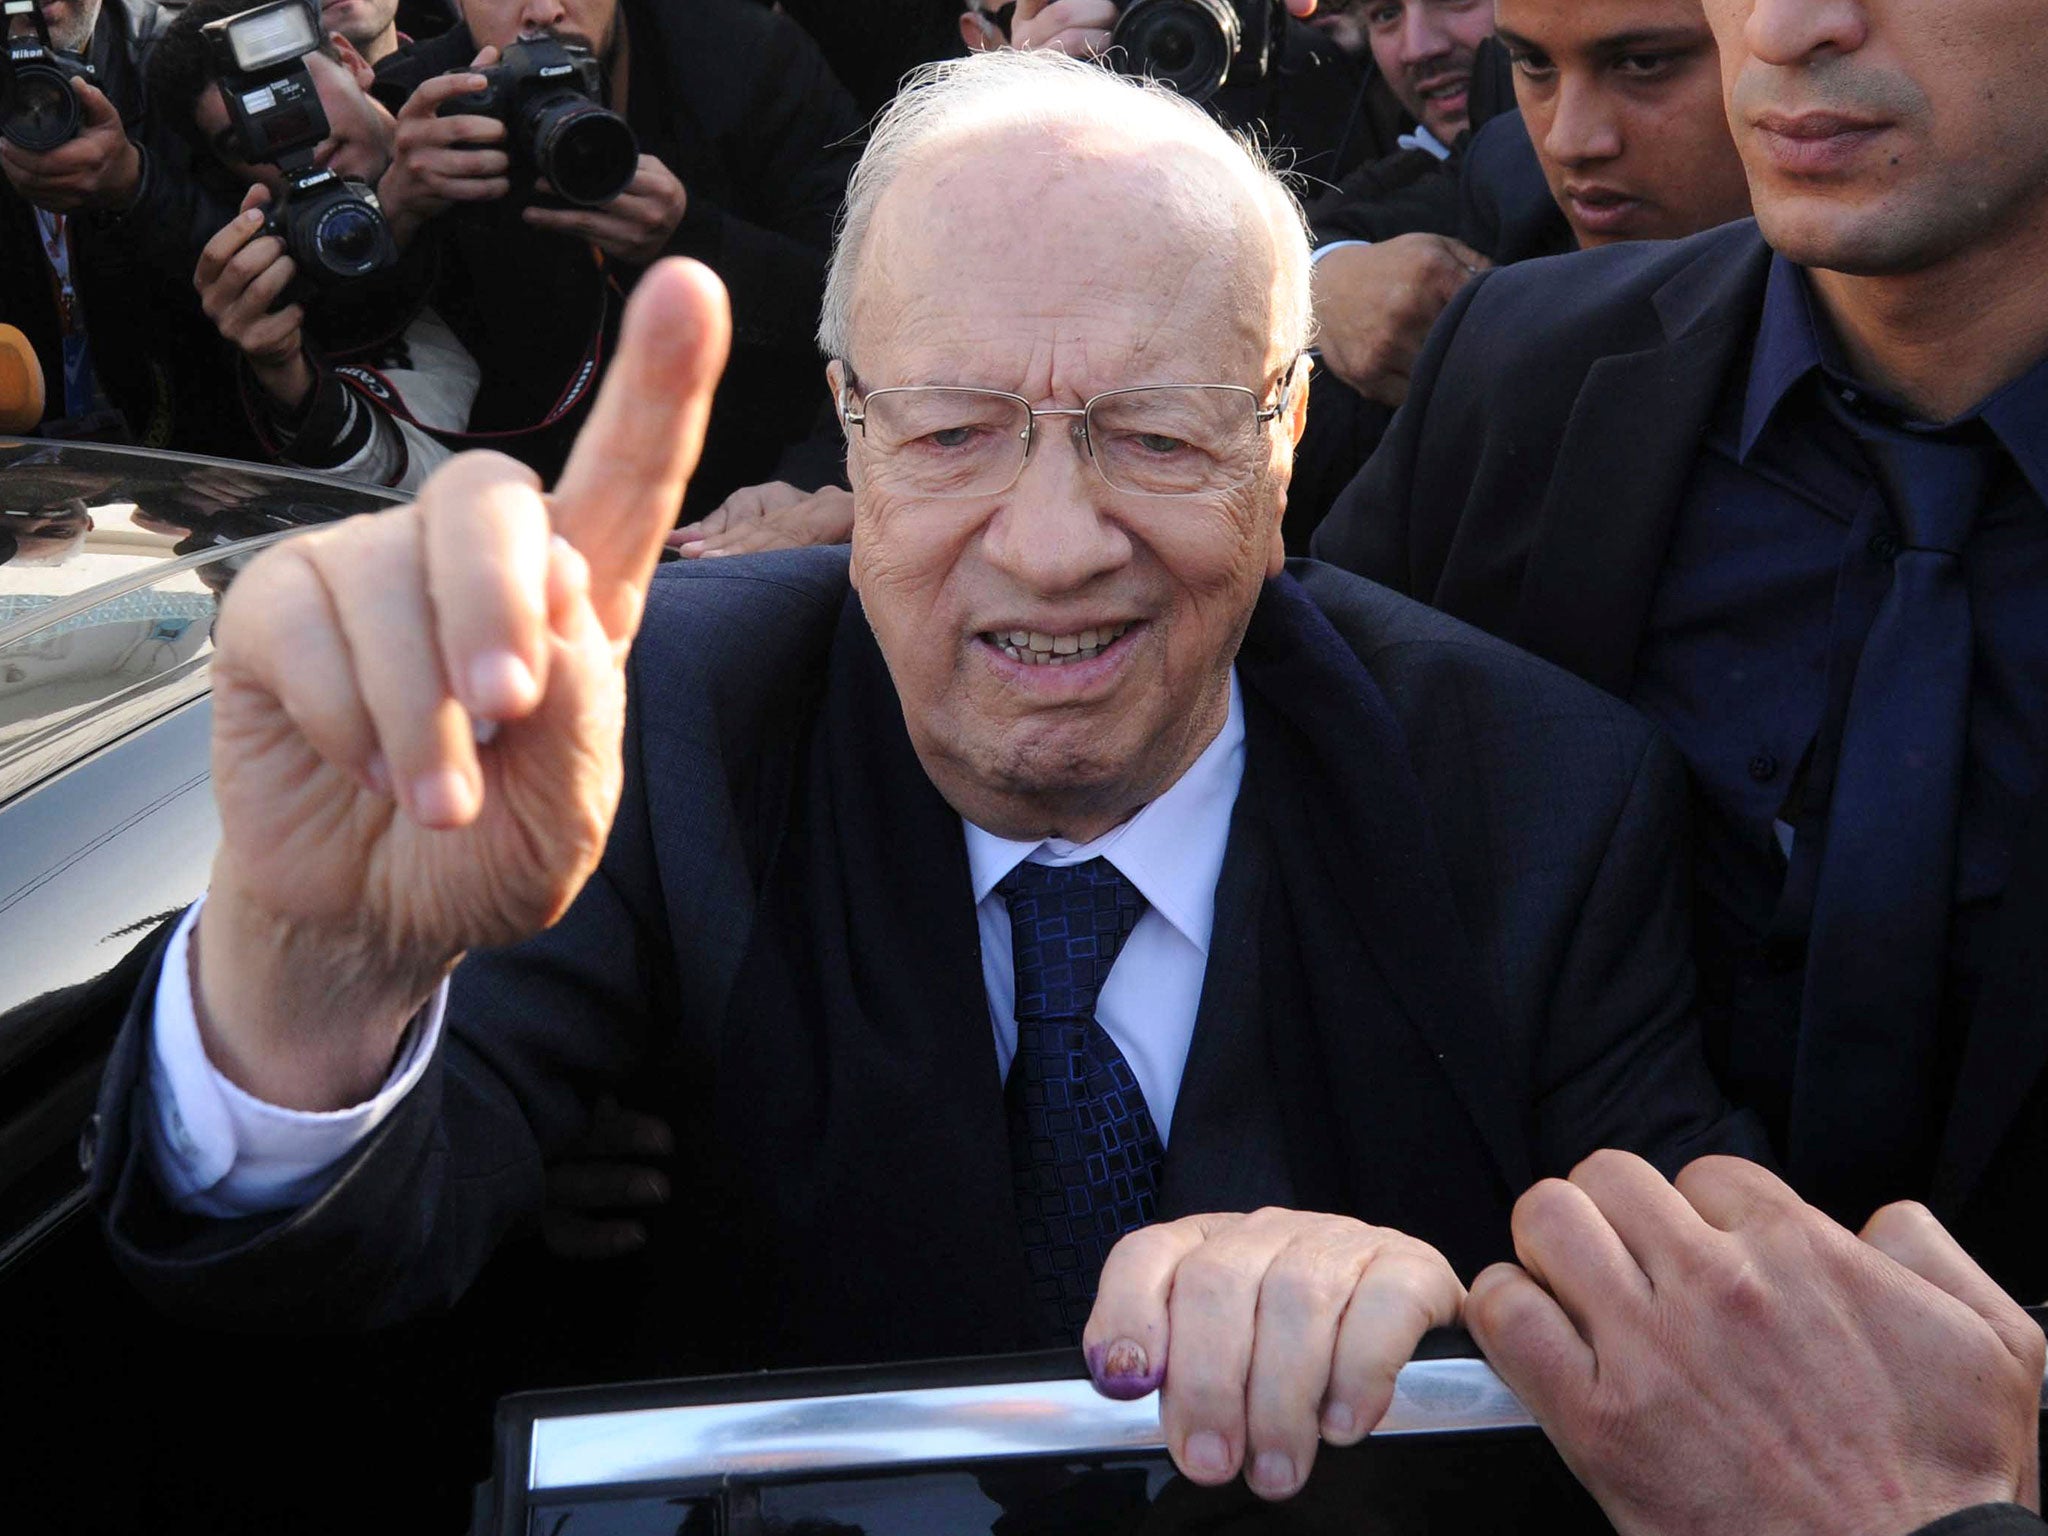 Beji Caid Essebsi, 88, a veteran of the political establishment, has been voted in as President, according to official results in the first full, free presidential election since independence in 1956